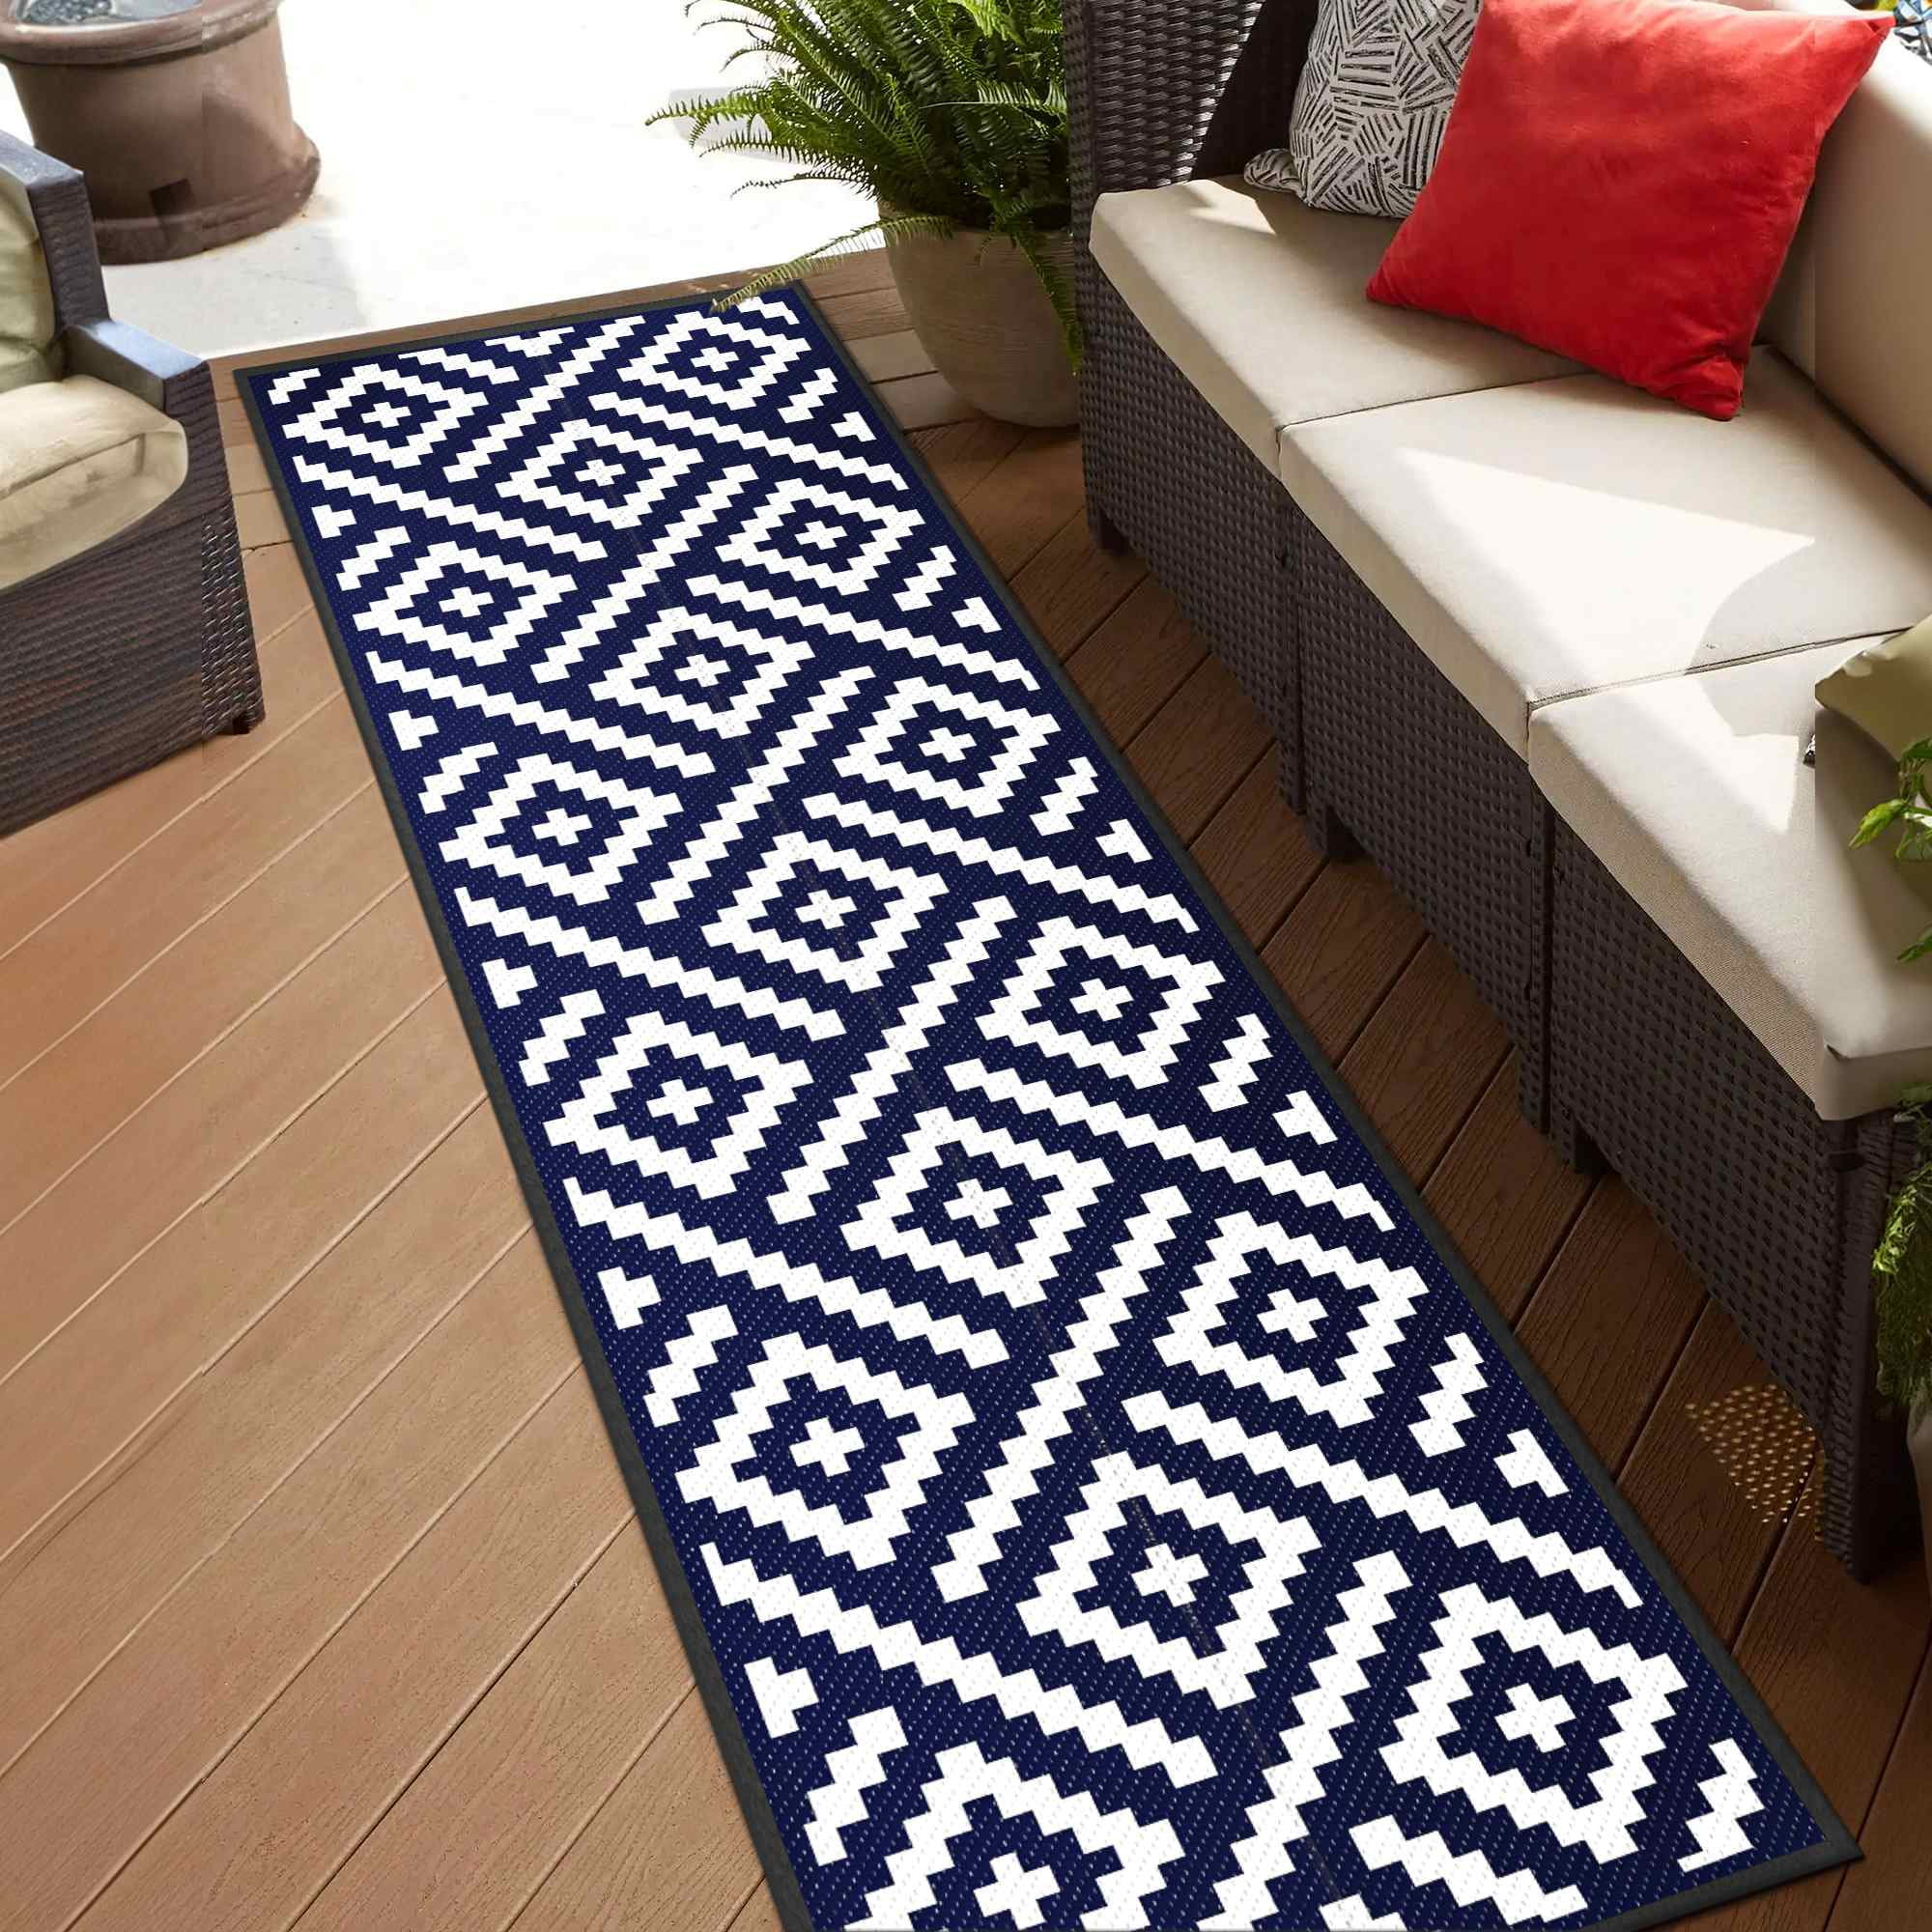 Sumiye Outdoor Rug for Patio Clearance, Waterproof Mat,Reversible Plastic Camping Rugs,Black & Gray Foundry Select Rug Size: Rectangle 4' x 6